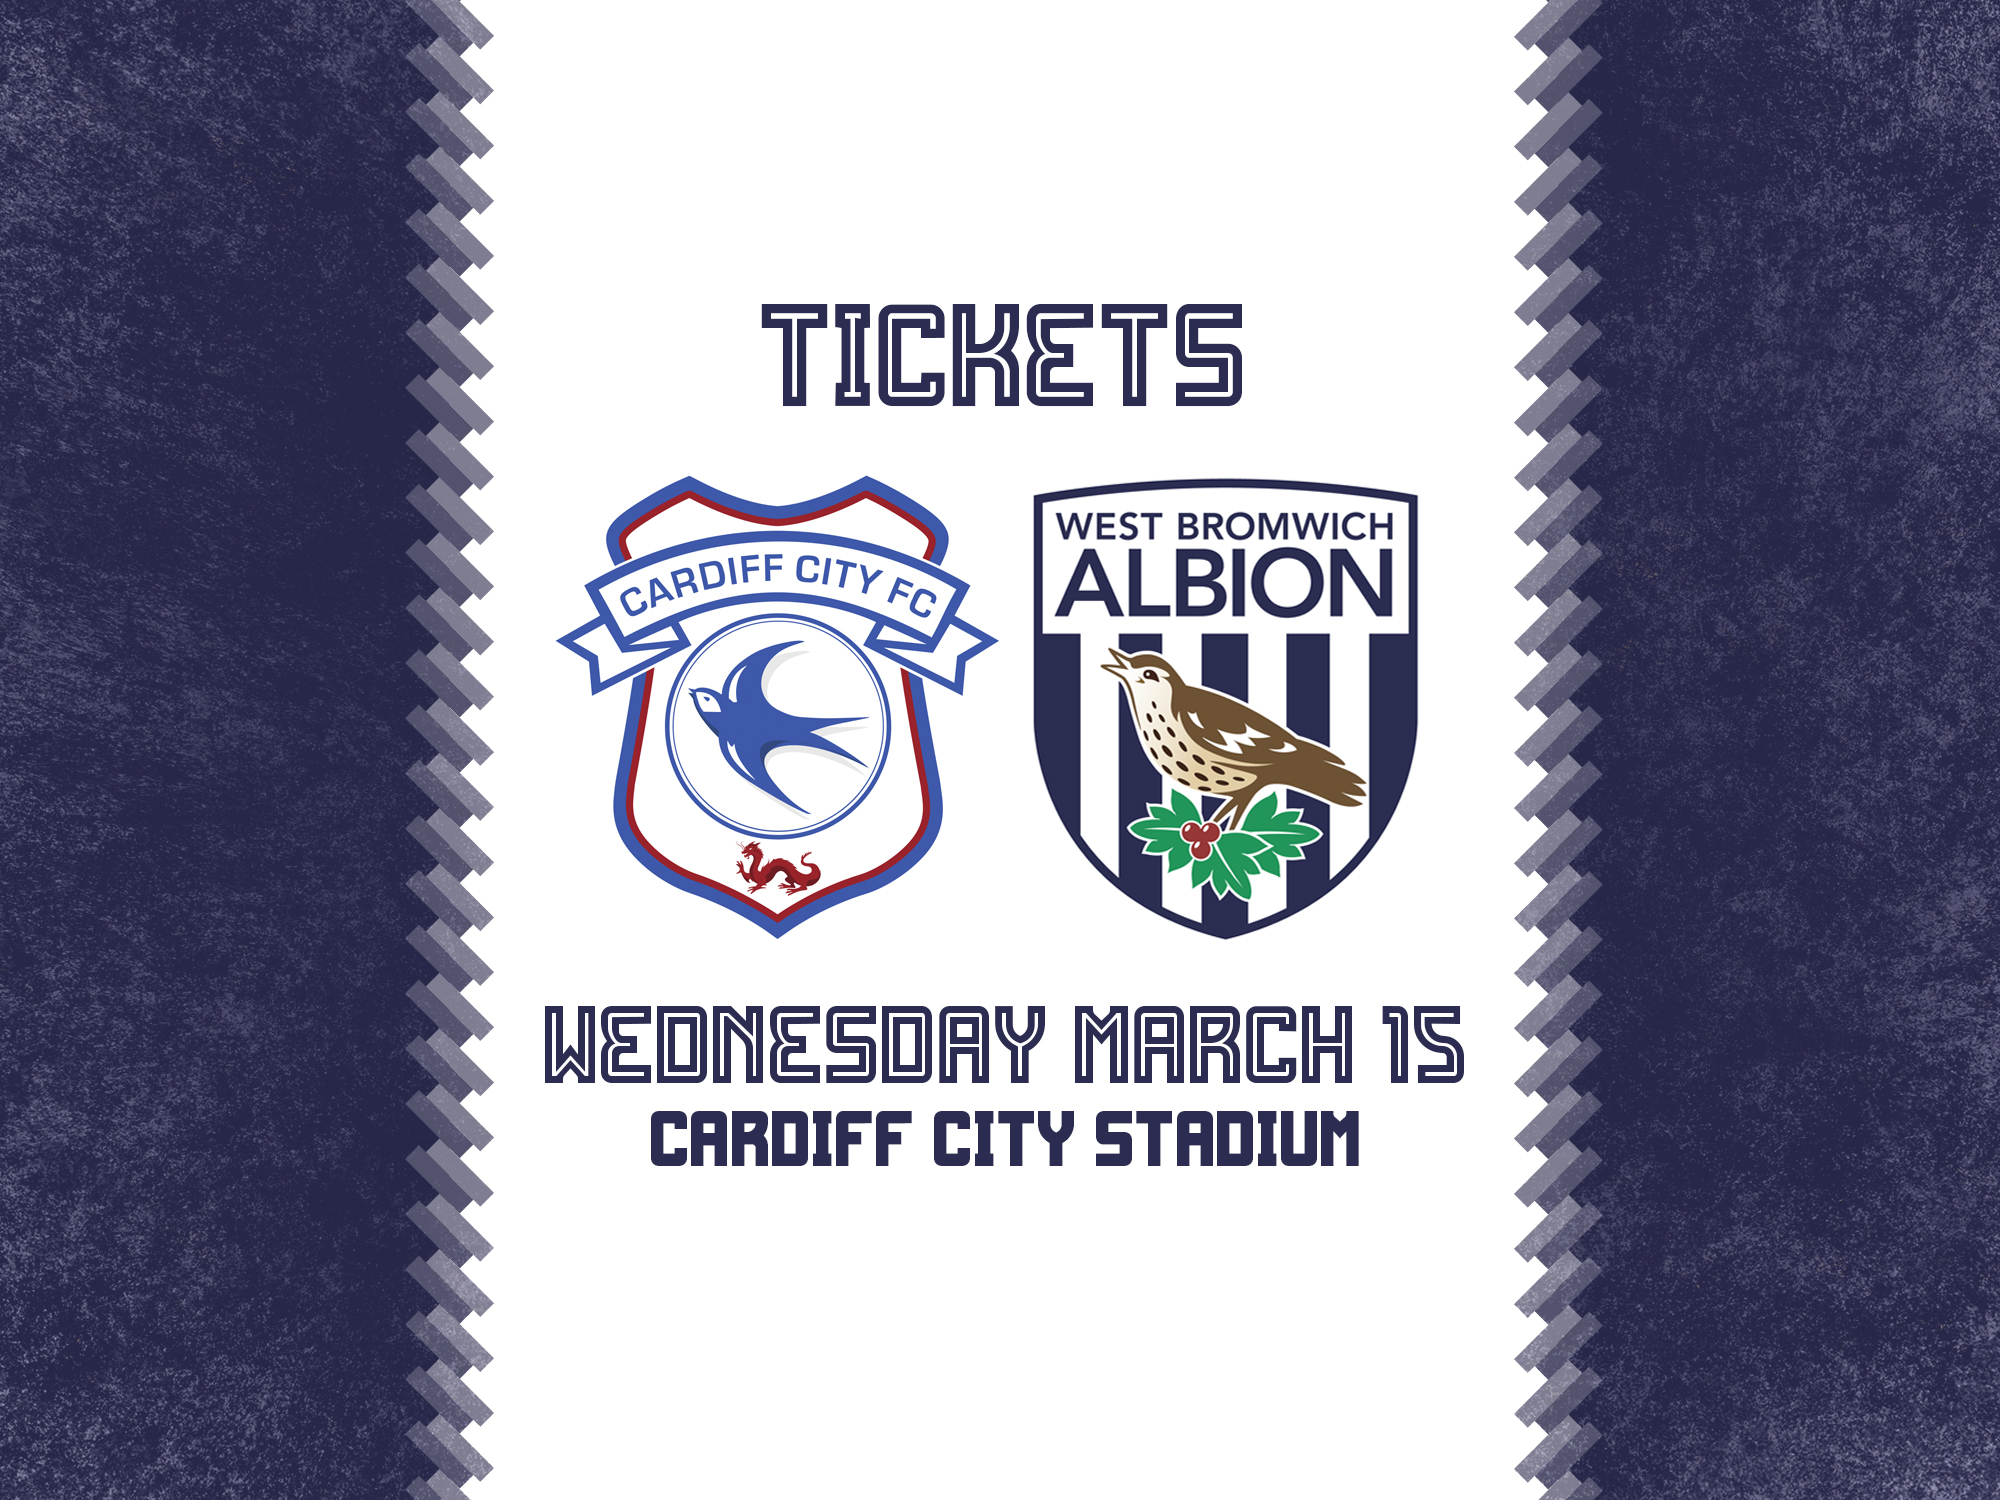 A ticket graphic for Albion's trip to Cardiff City